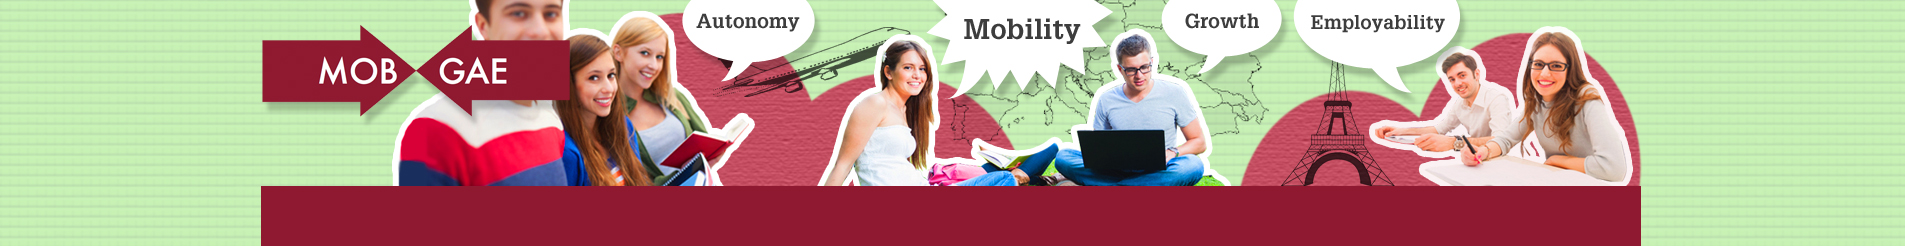 MOBility as a source of personal and professional Growth, Autonomy and Employability